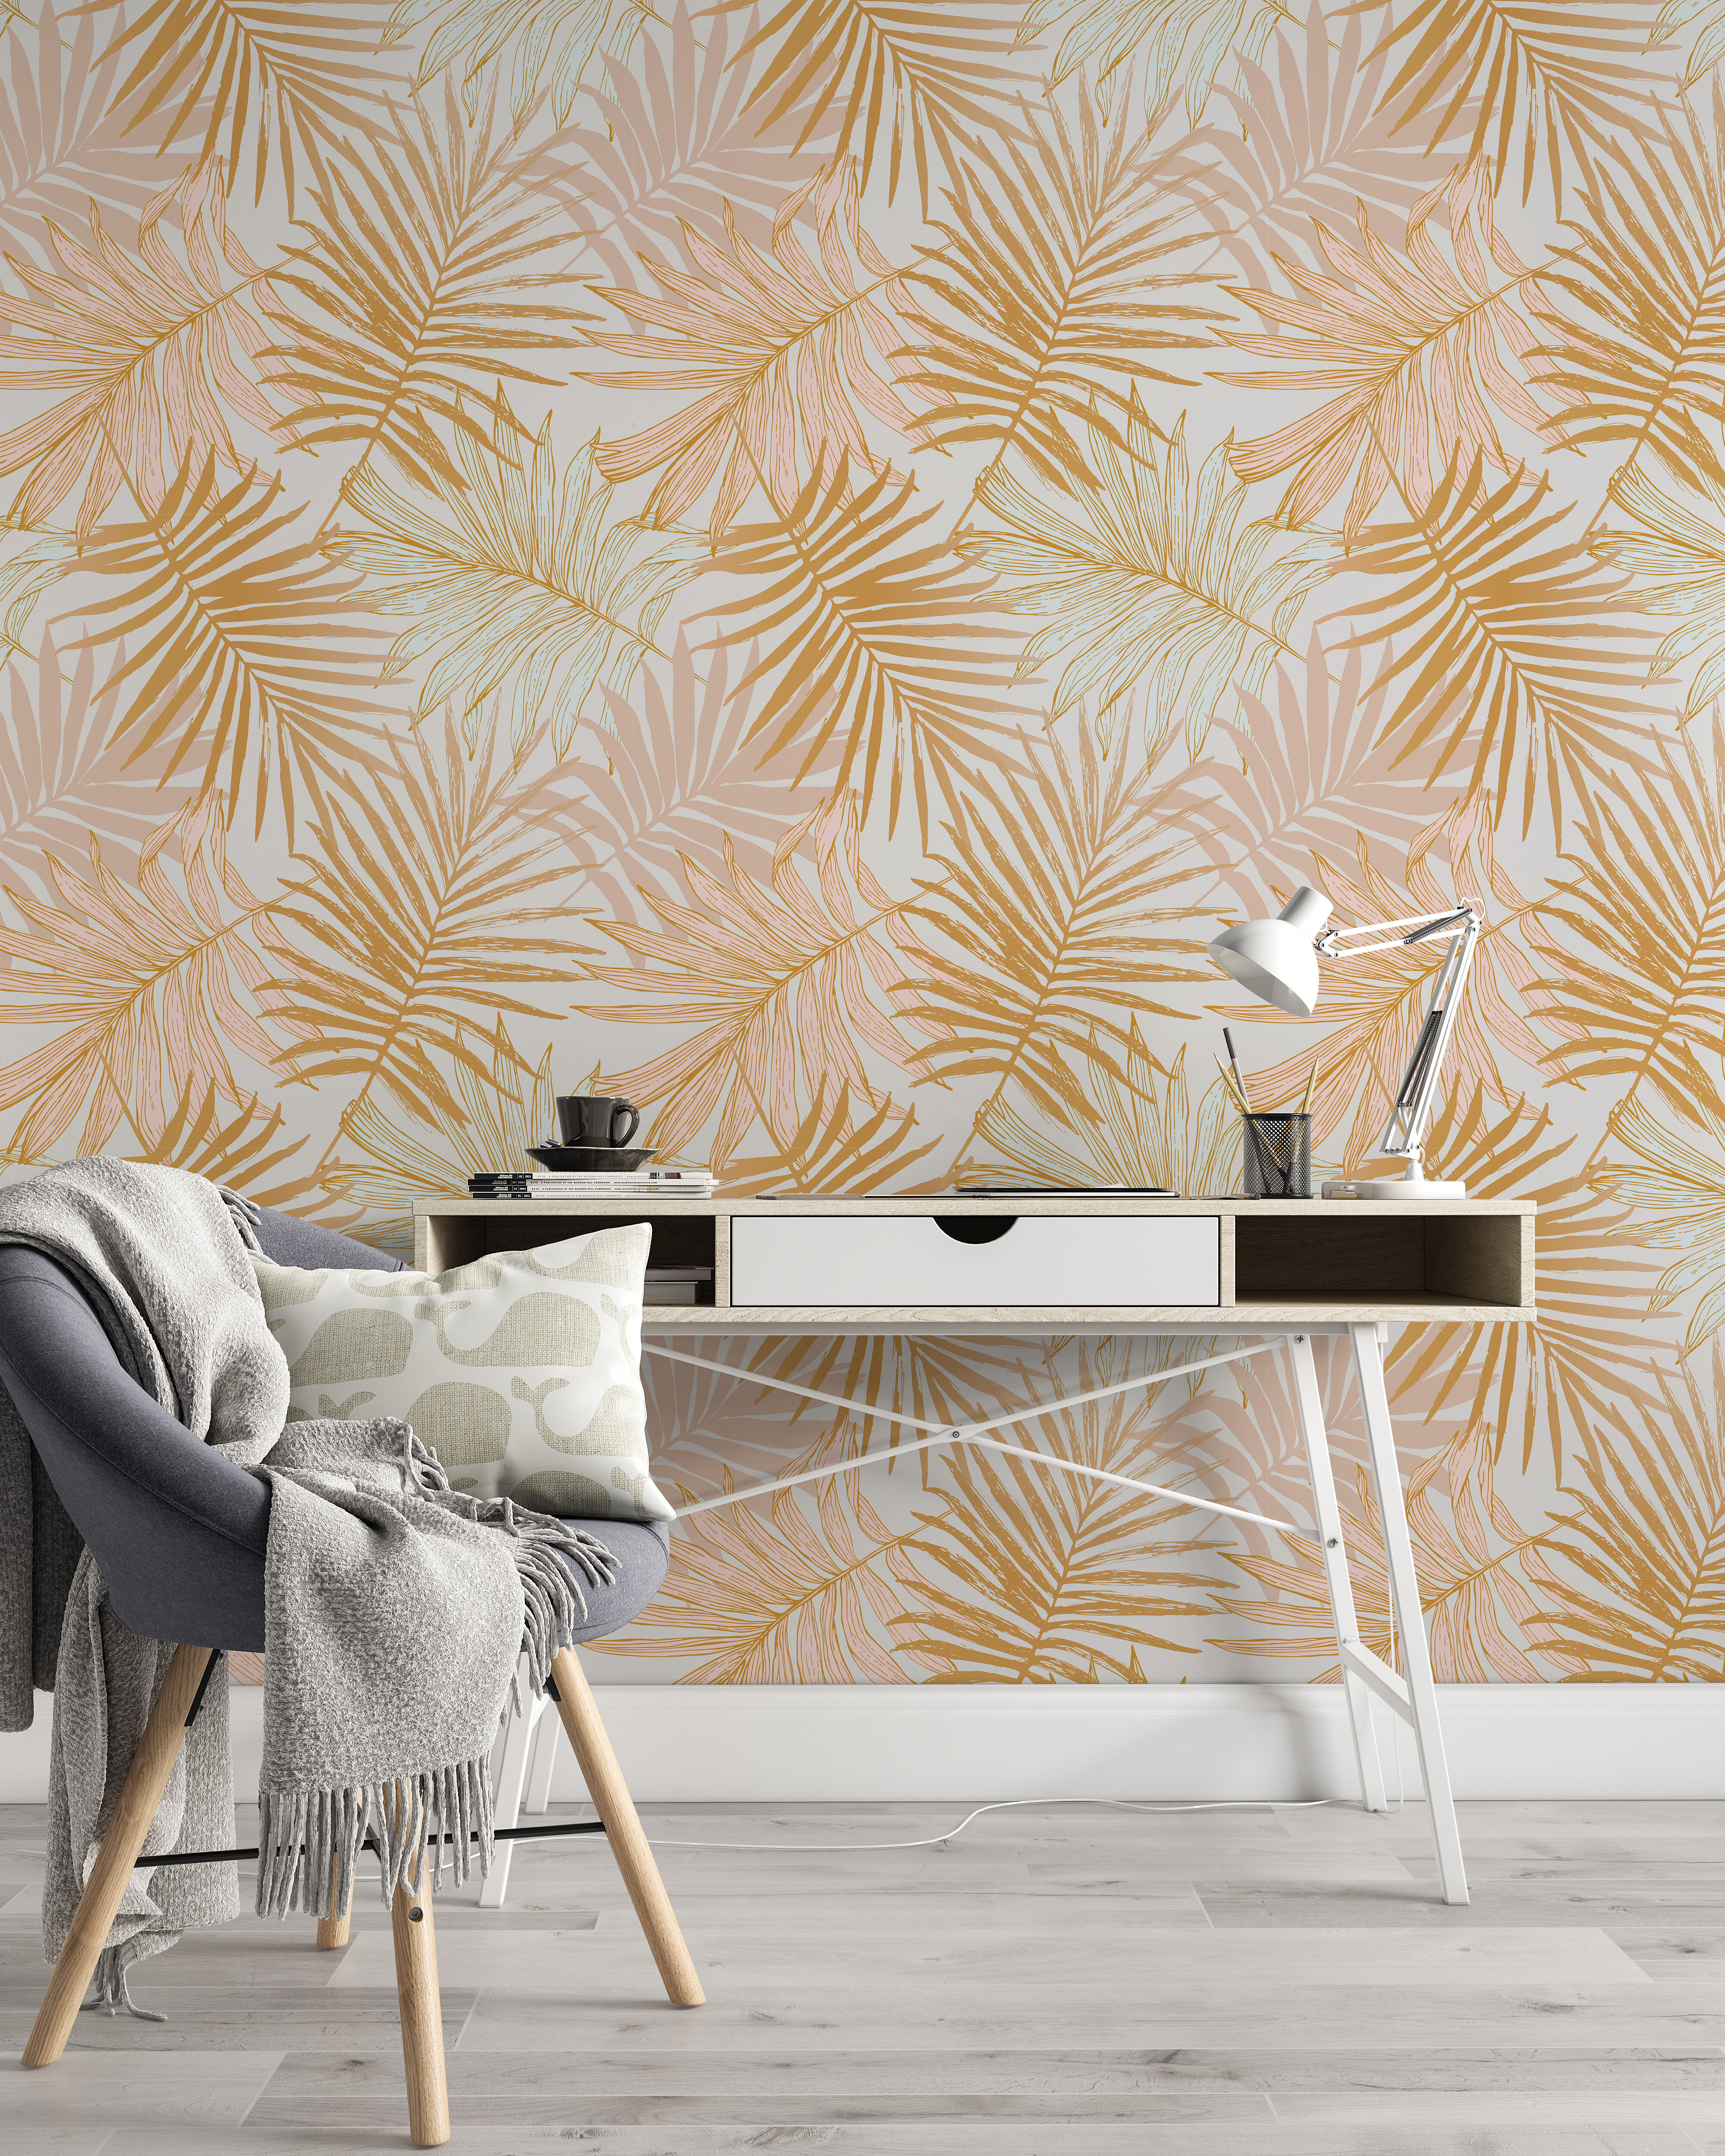 Bayou Breeze Colyn Peel And Stick Wallpaper Tropical Wallpaper Large Scale  Mural & Reviews | Wayfair